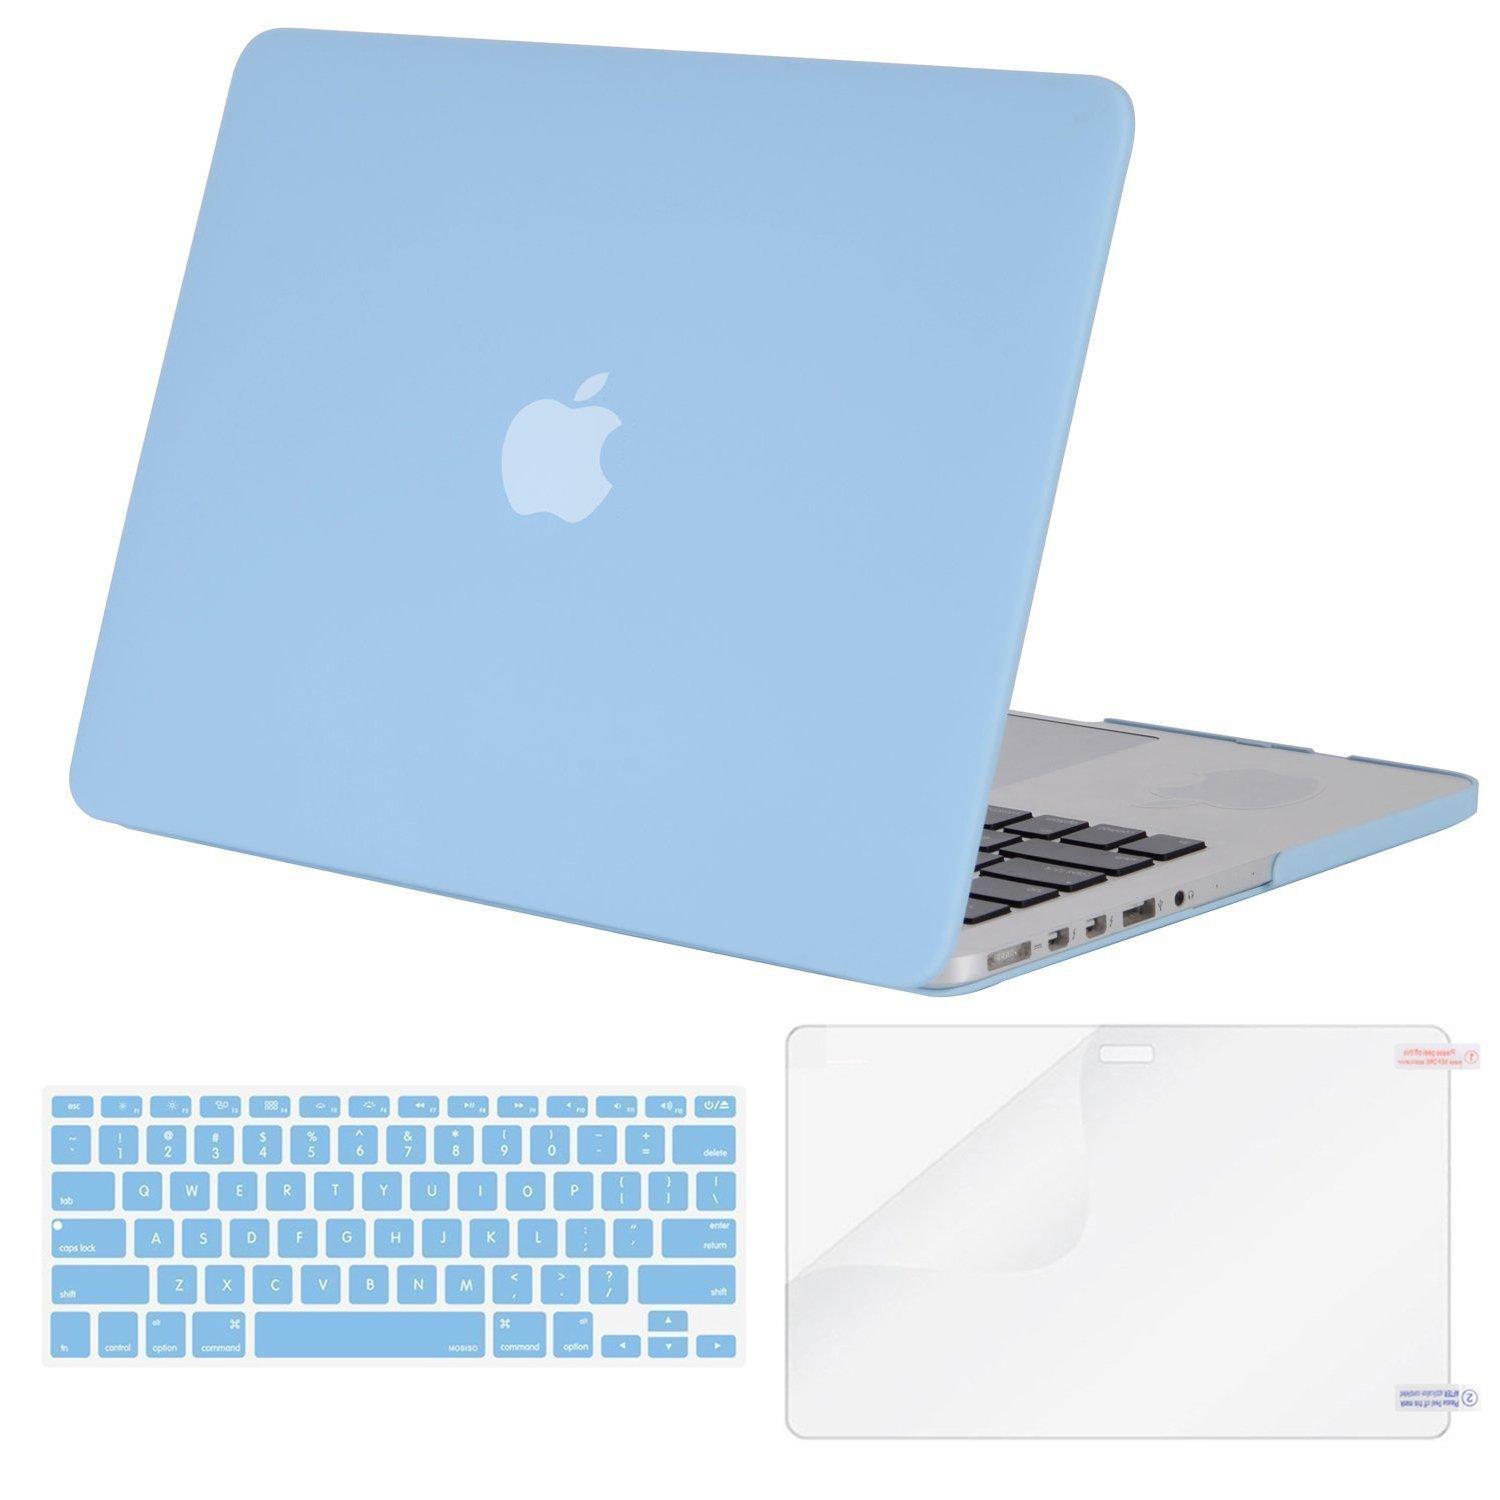 MacBook Air 13 Case Transparent Frosted Plastic Hard Shell Case Cover Bundle for Apple MacBook Air 13 Inch A1369/ A1466...